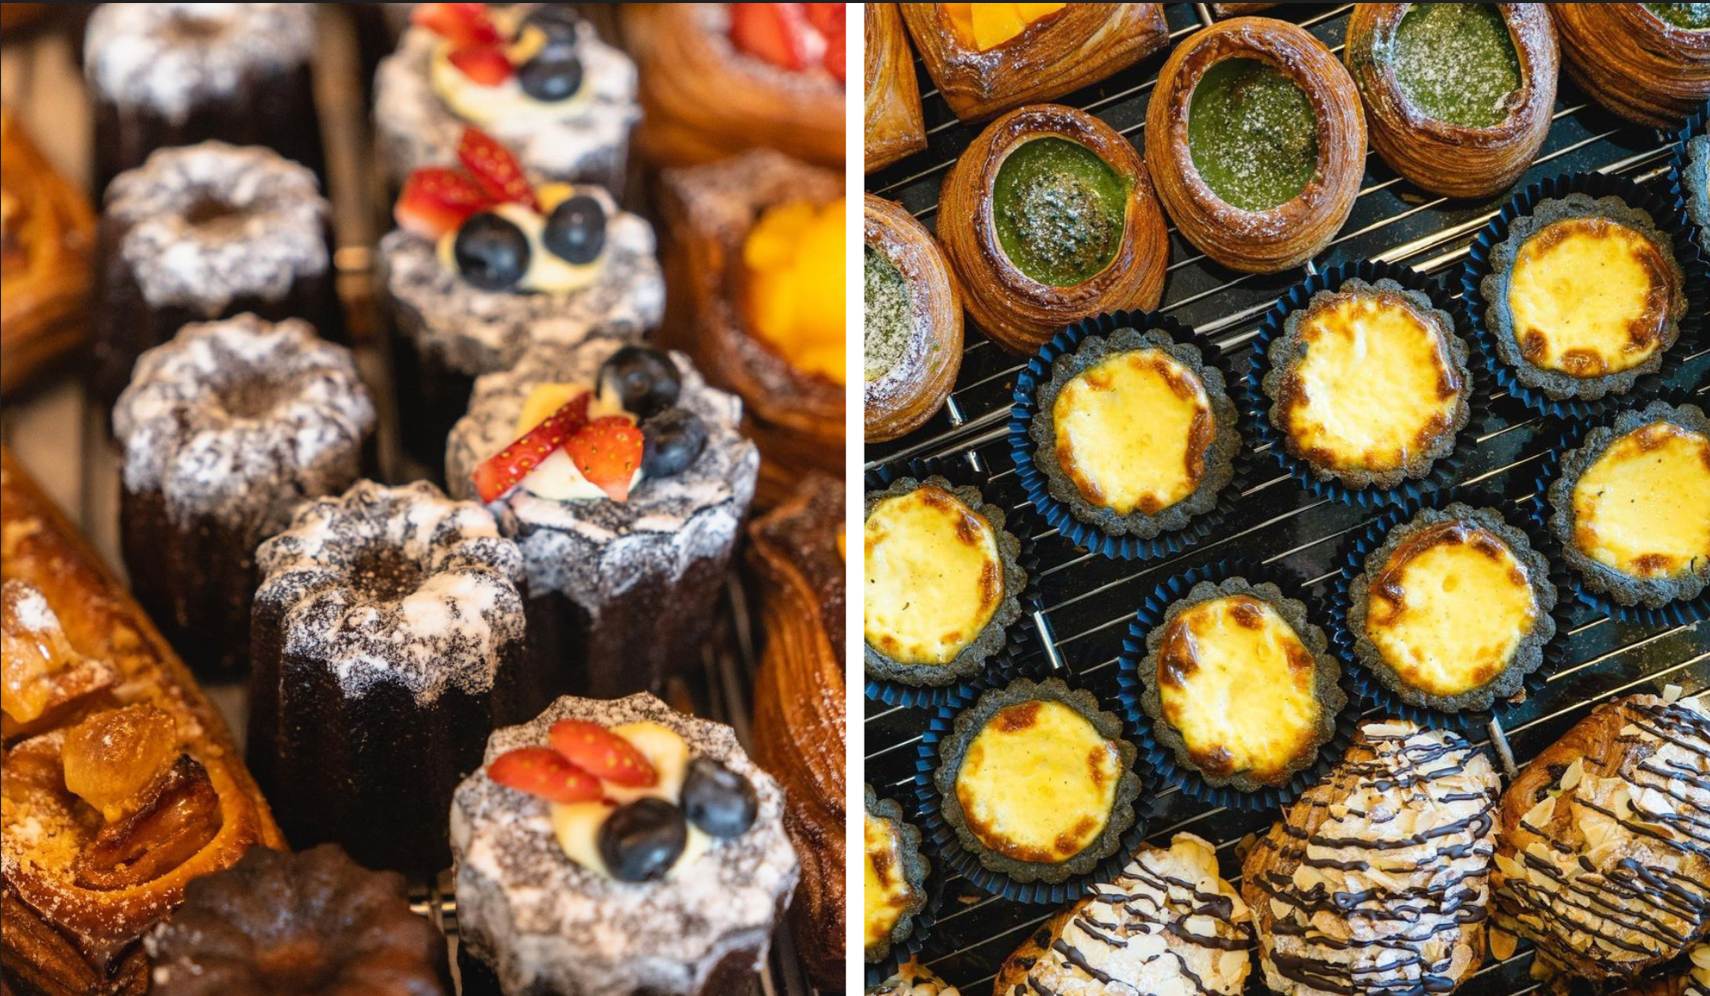 Bakeries in KL and PJ - Noon Viennoiserie